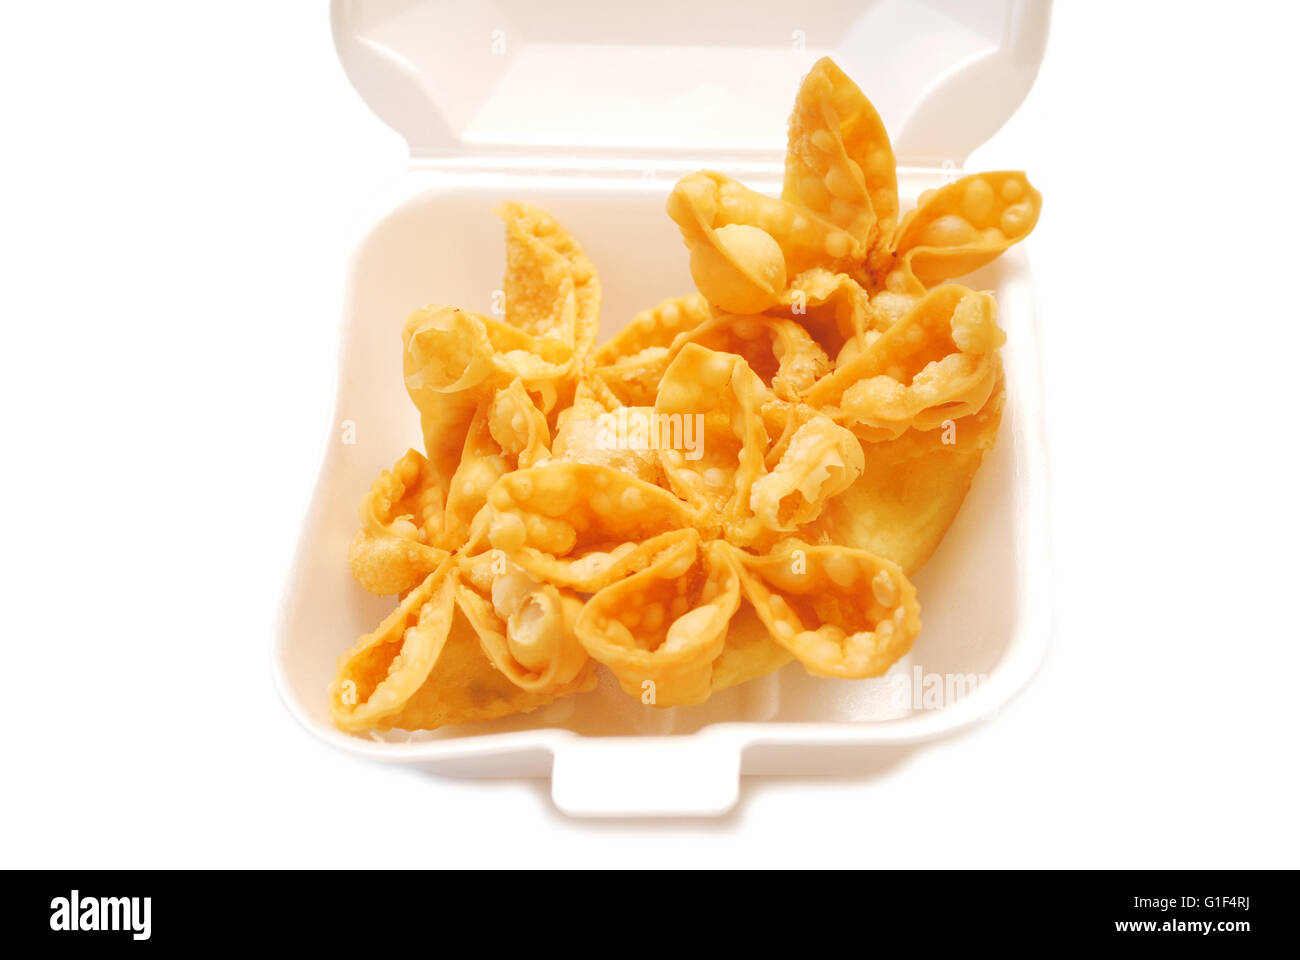 Deep Fried Crab Rangoon Appetizers Served in a Takeout Container Stock Photo